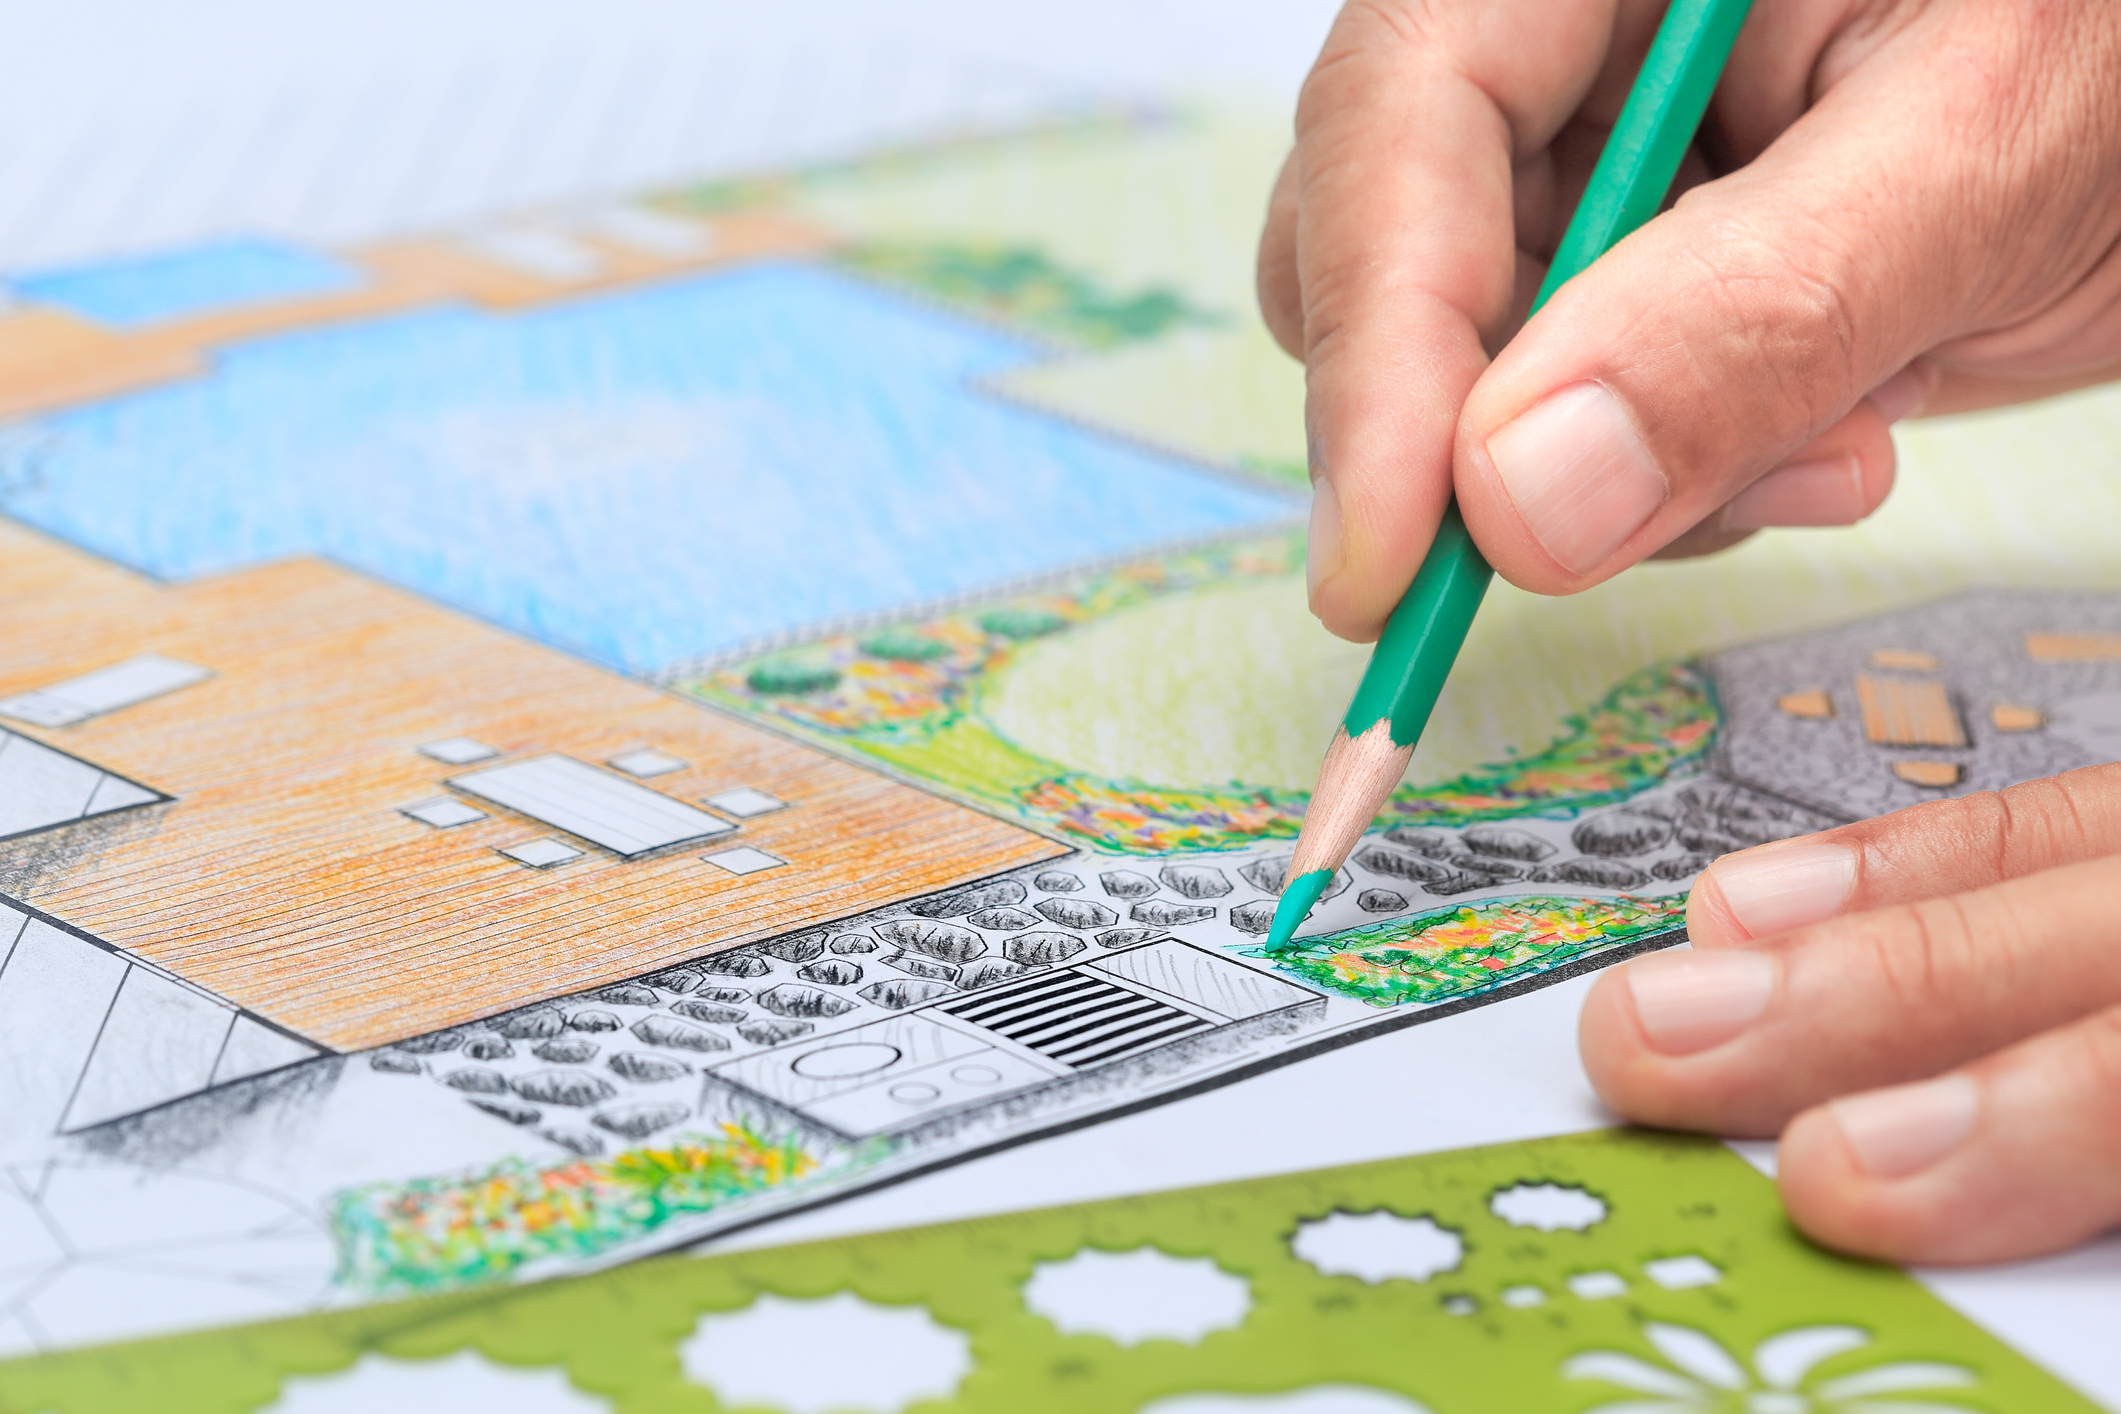 Close-up of a hand holding a pencil over a colorful landscape design blueprint.